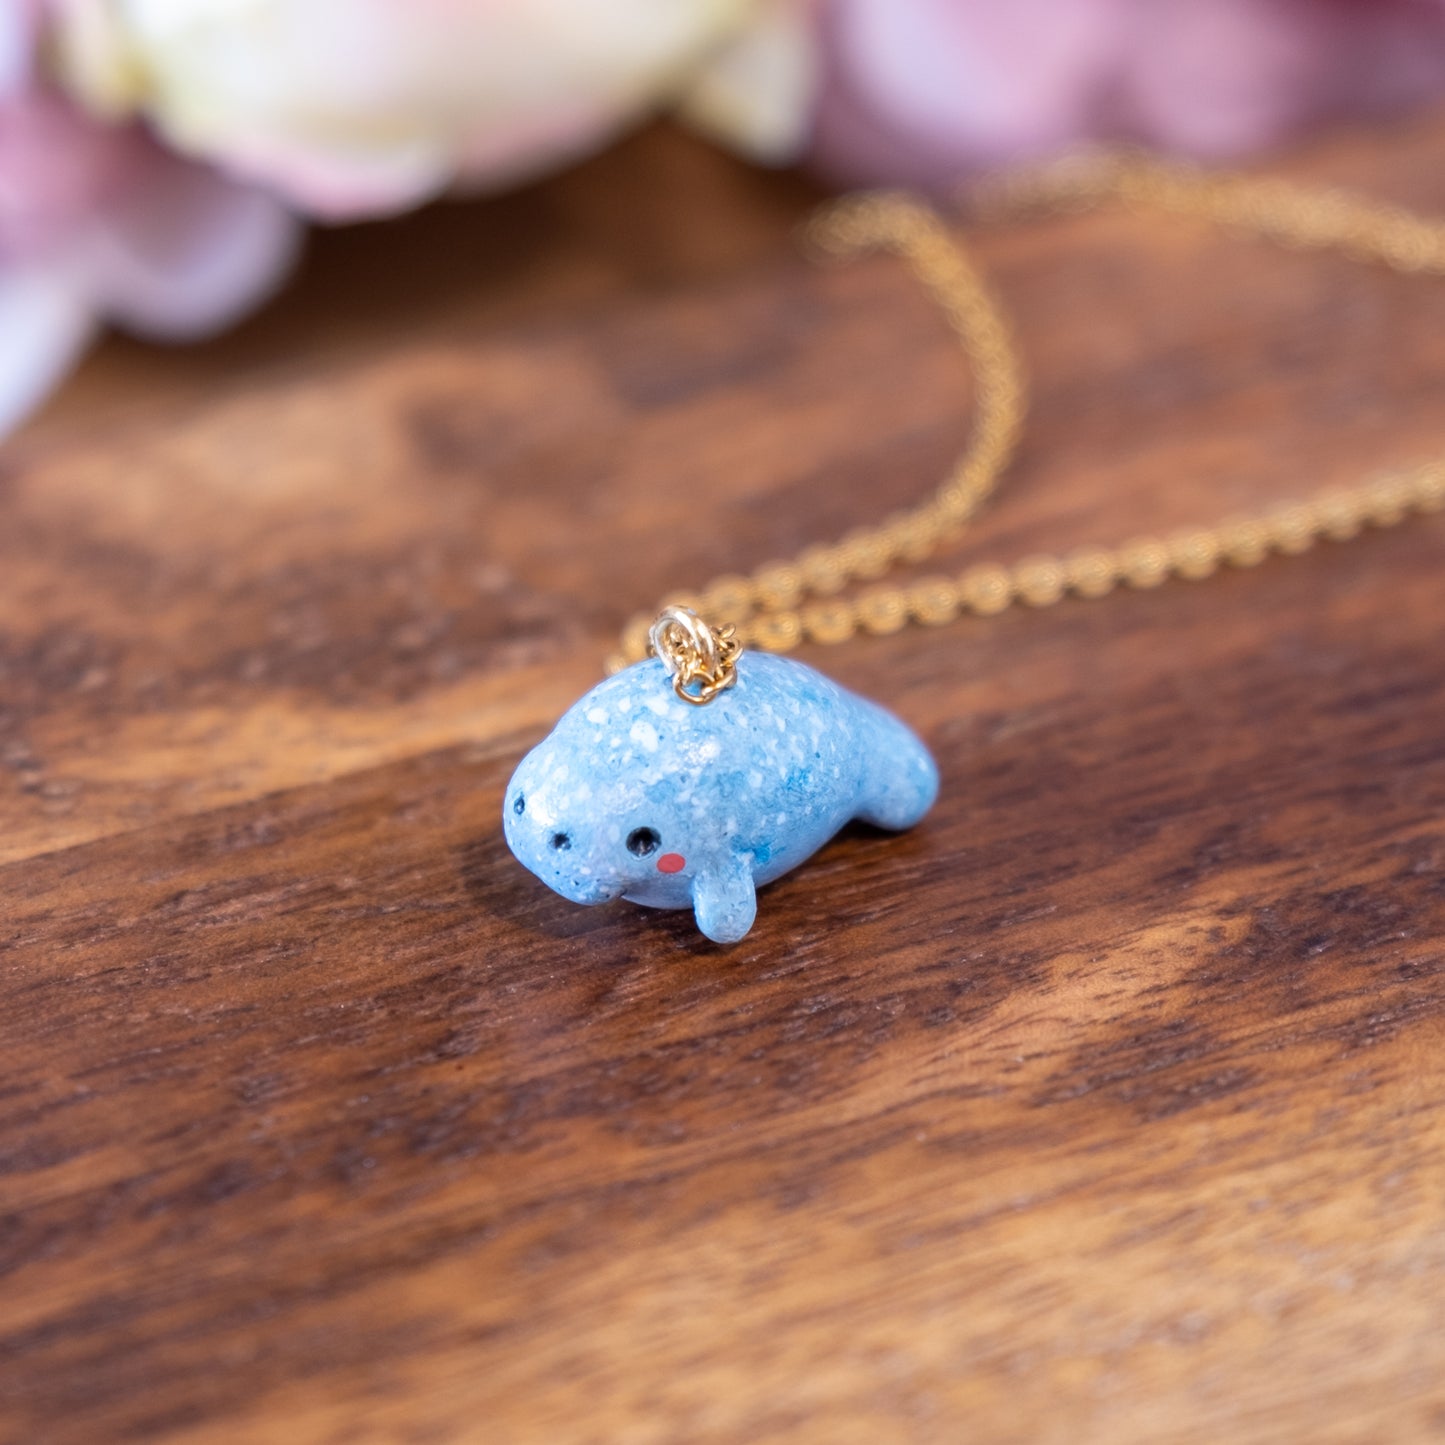 Tiny Lamantin Necklace in Polymer Clay